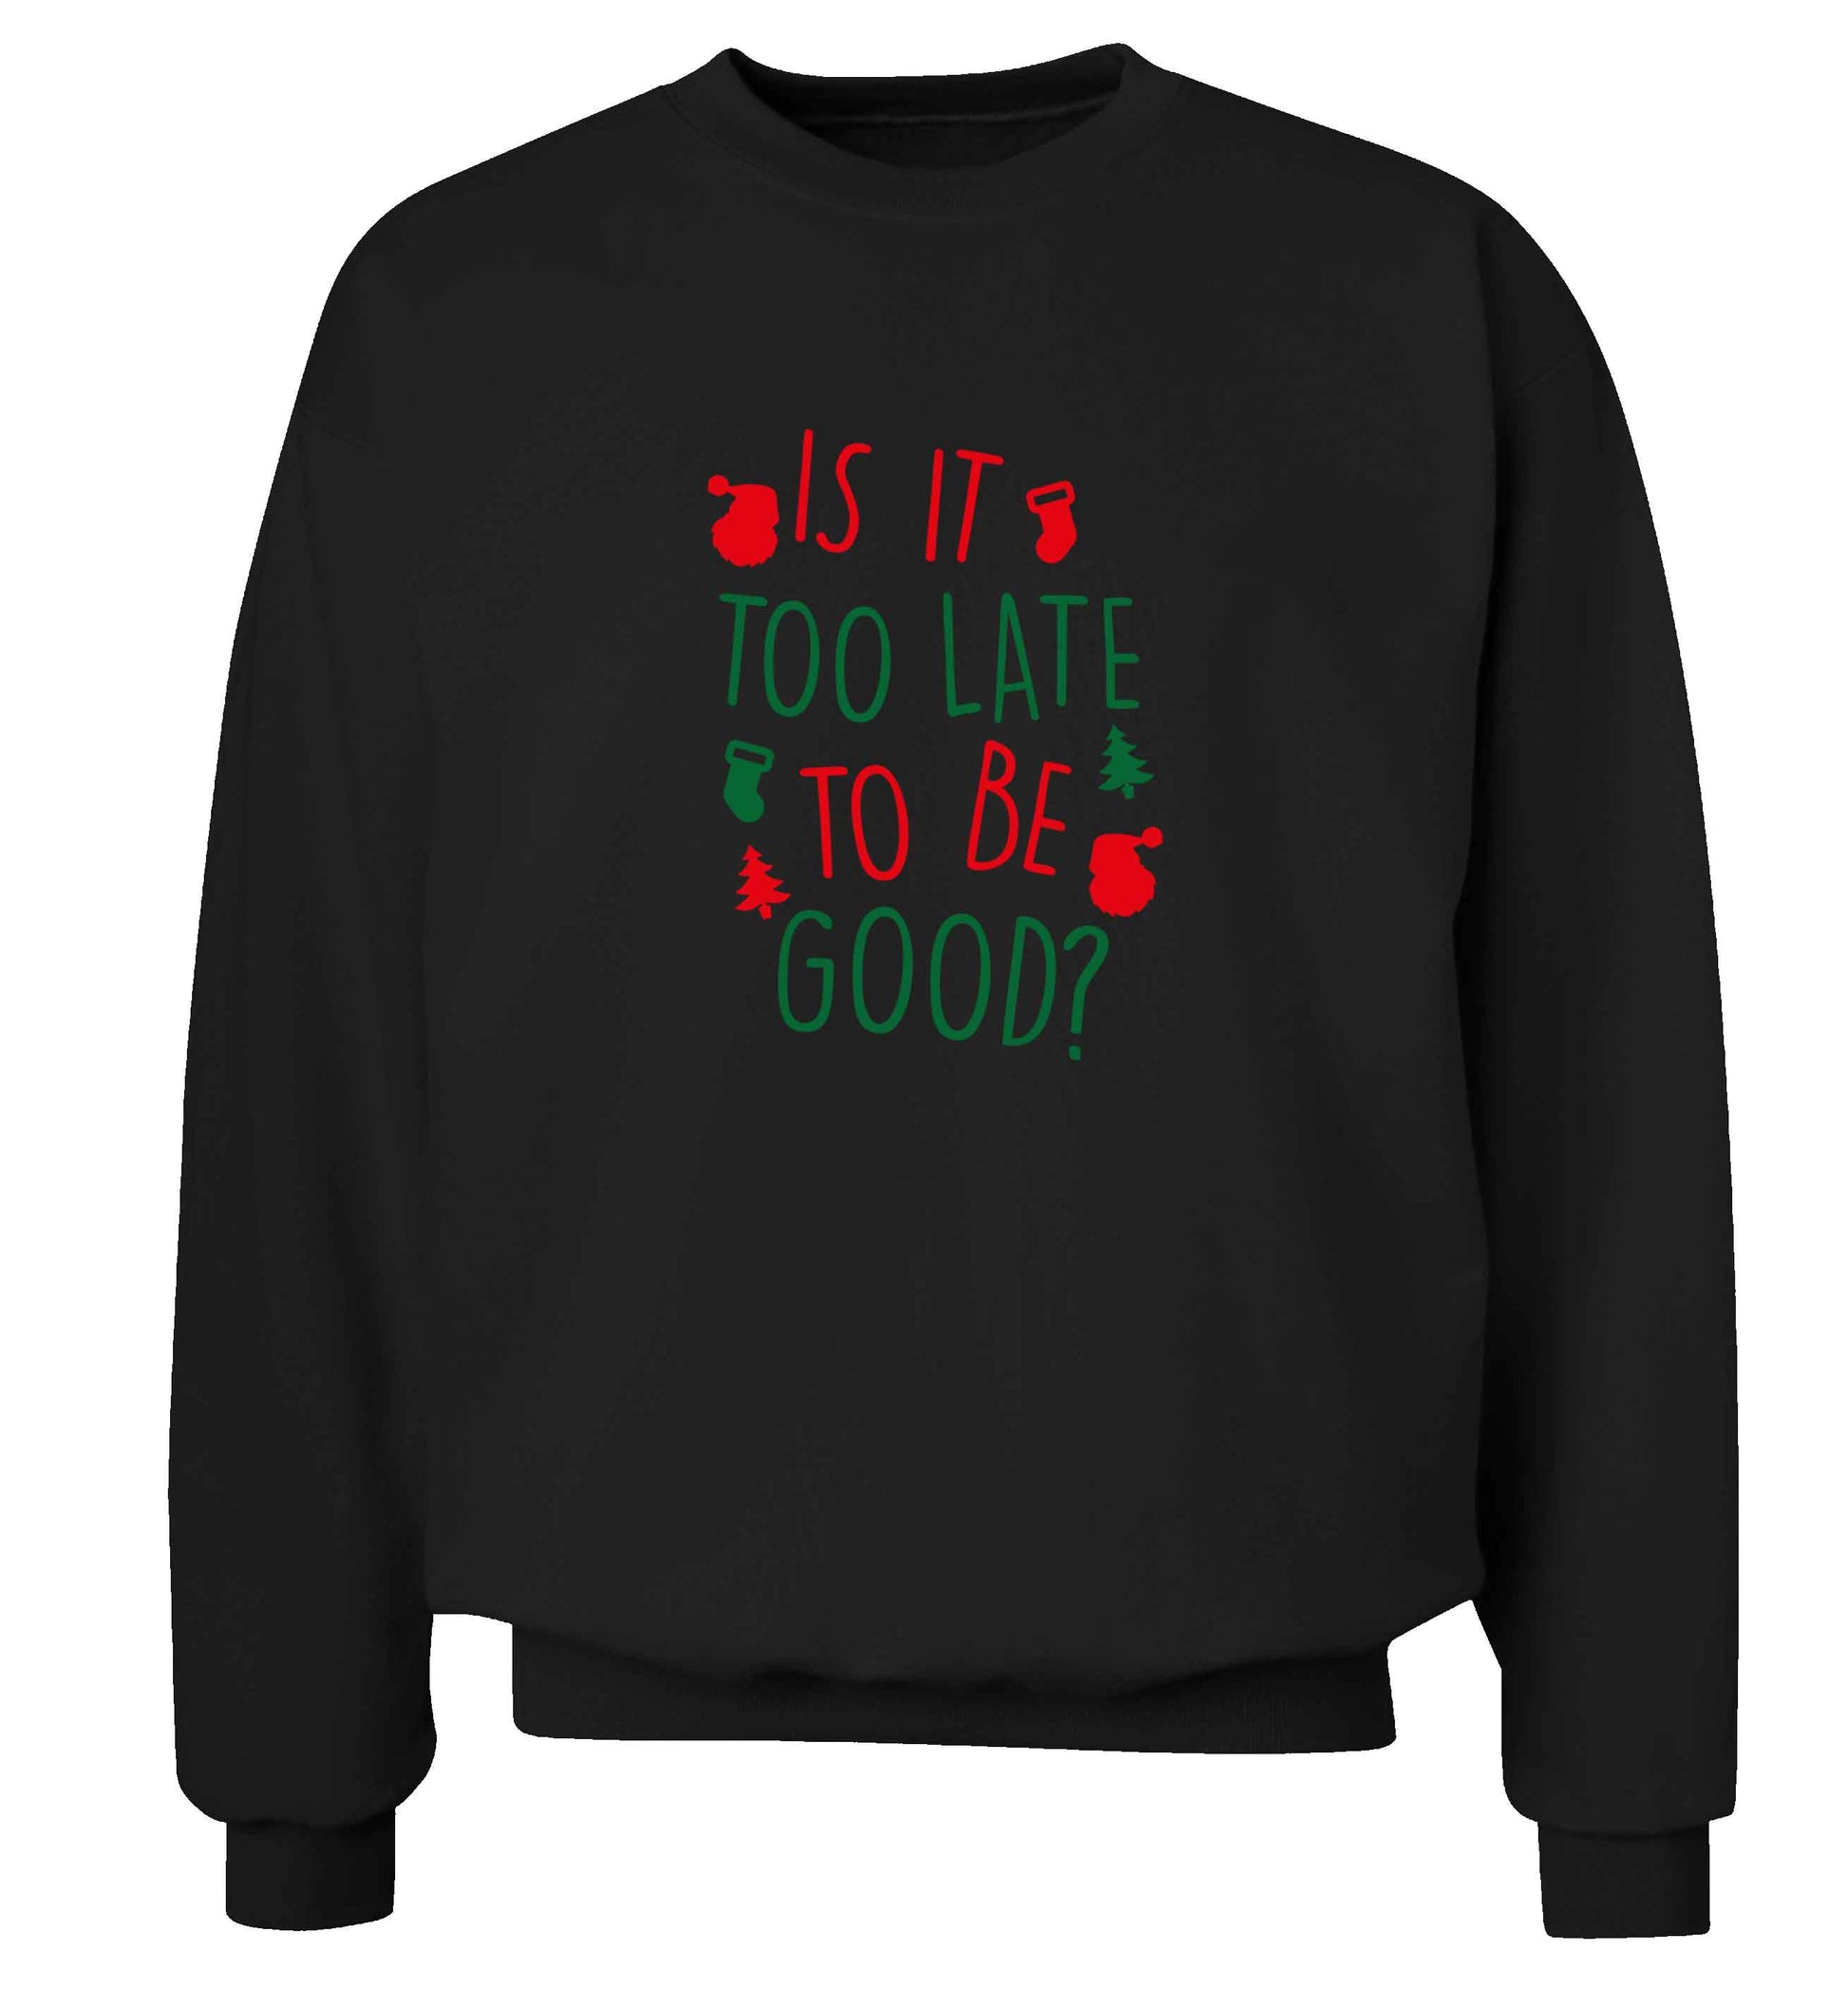 Too Late to be Good adult's unisex black sweater 2XL